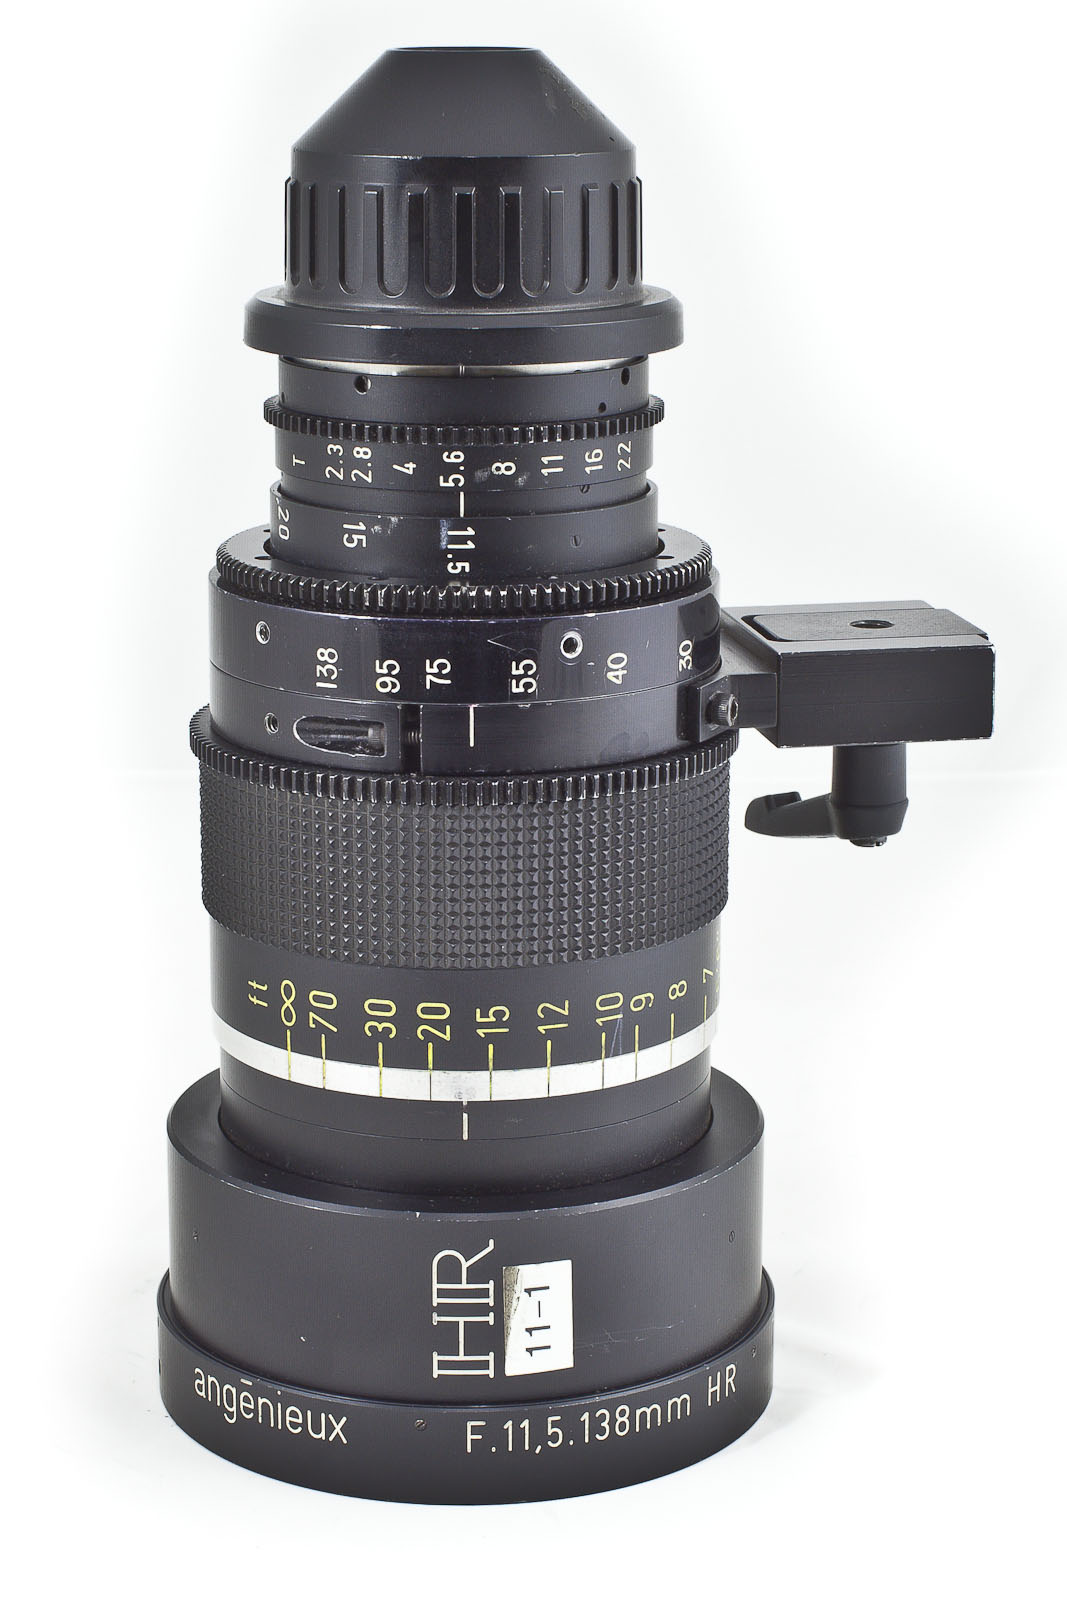 Angenieux 11.5-138mm T2.3 Zoom Lens (S16)